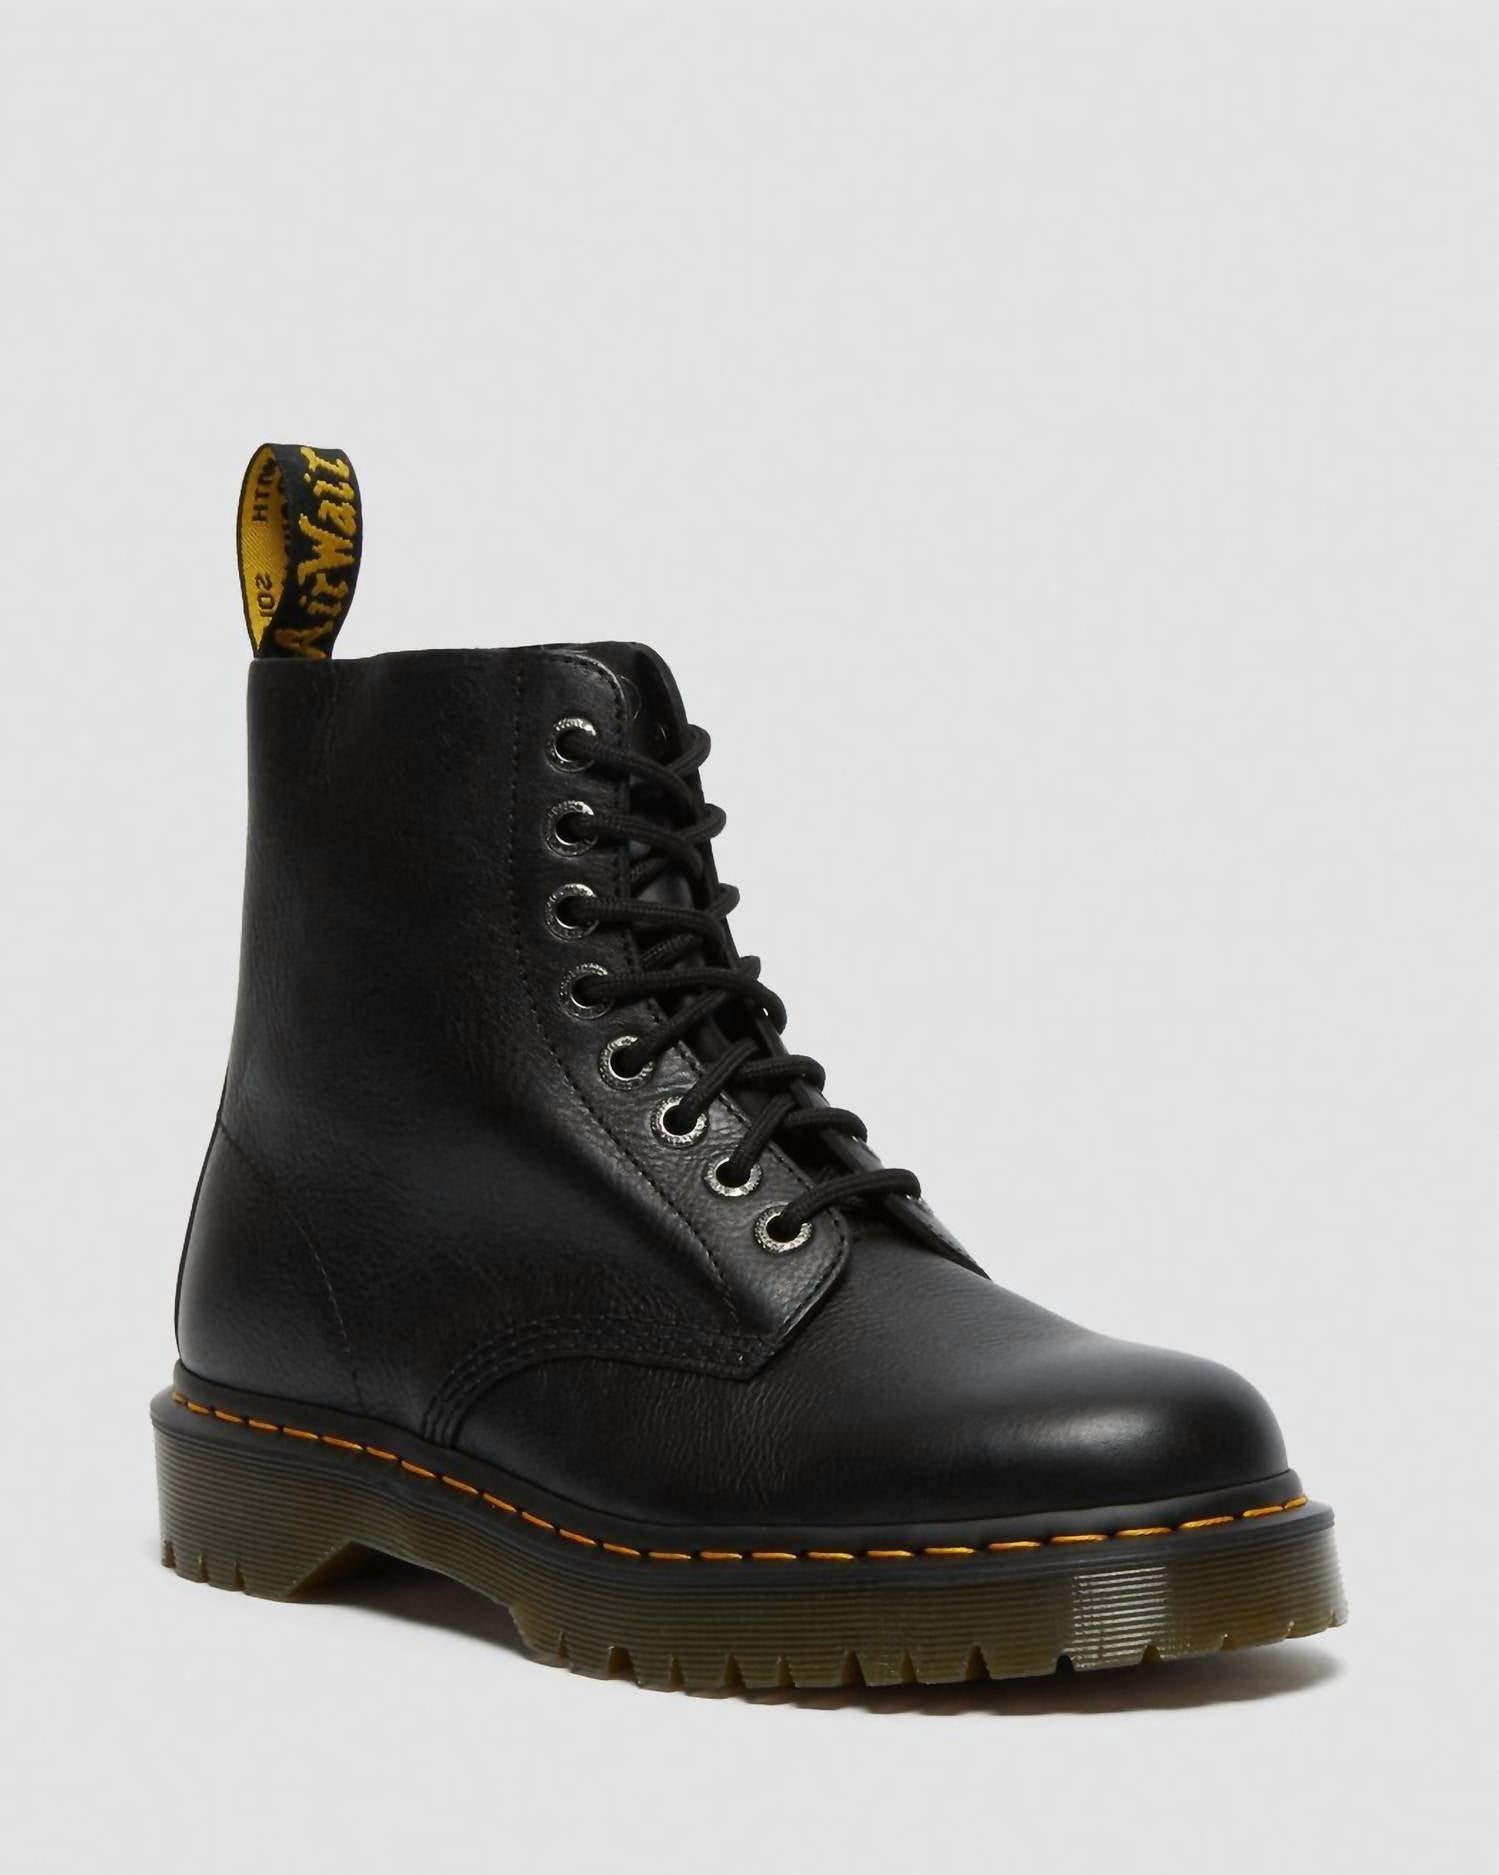 DR. MARTENS' Pascal Bex Leather Lace Up Boots in Black Pisa